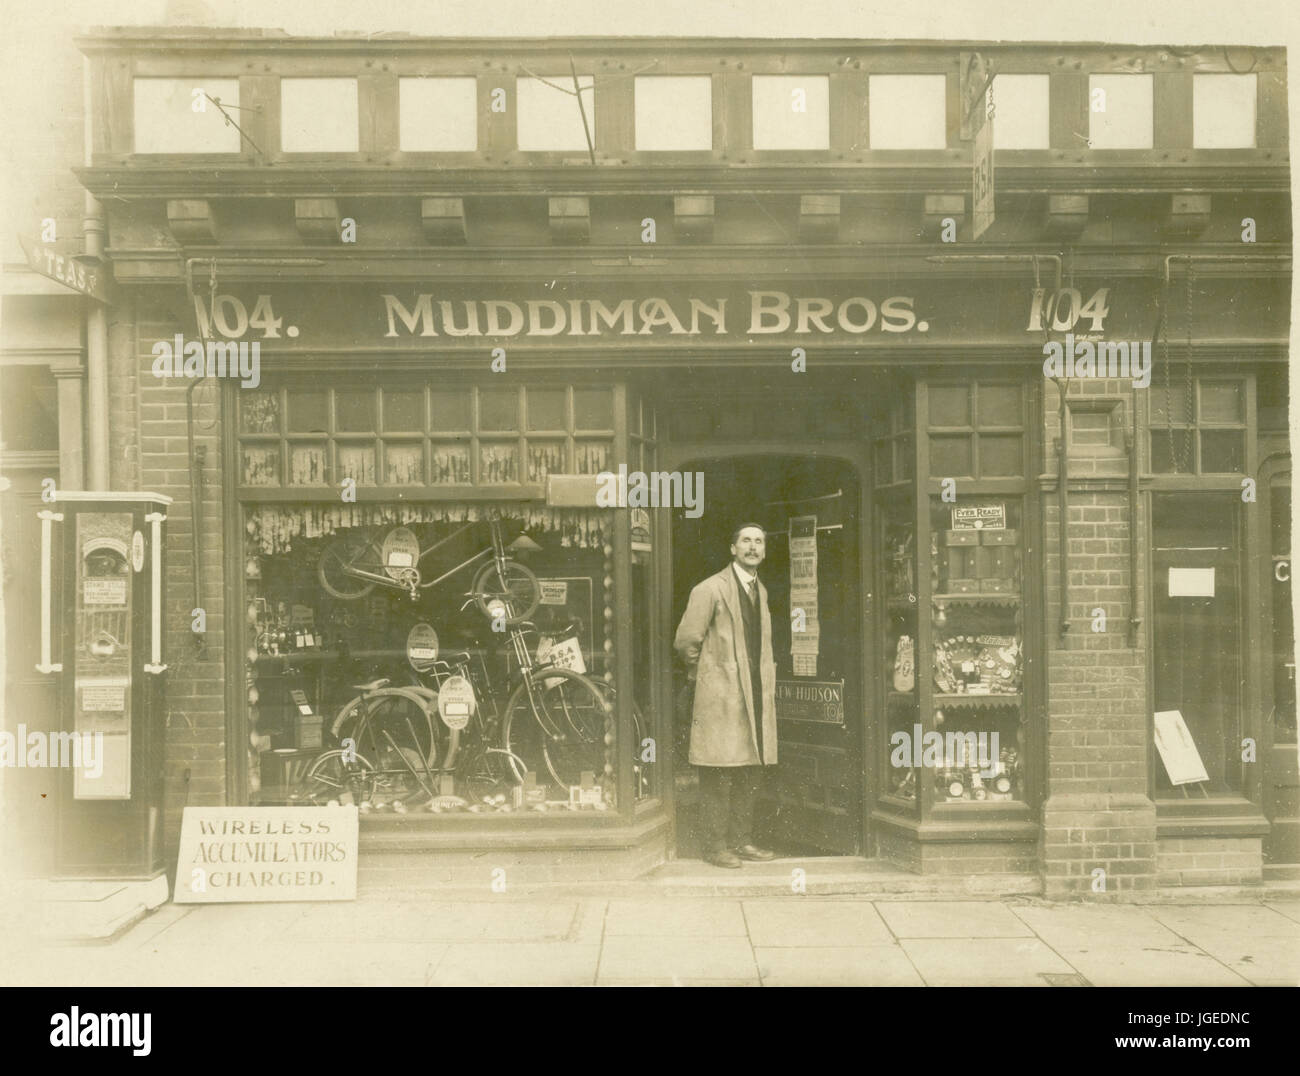 Postcard of man, possibly the proprietor, staff / assistant / assistants outside Muddiman Bros. cycle shop, 1930, 104 High St. possibly Suffolk, England, U.K. Stock Photo